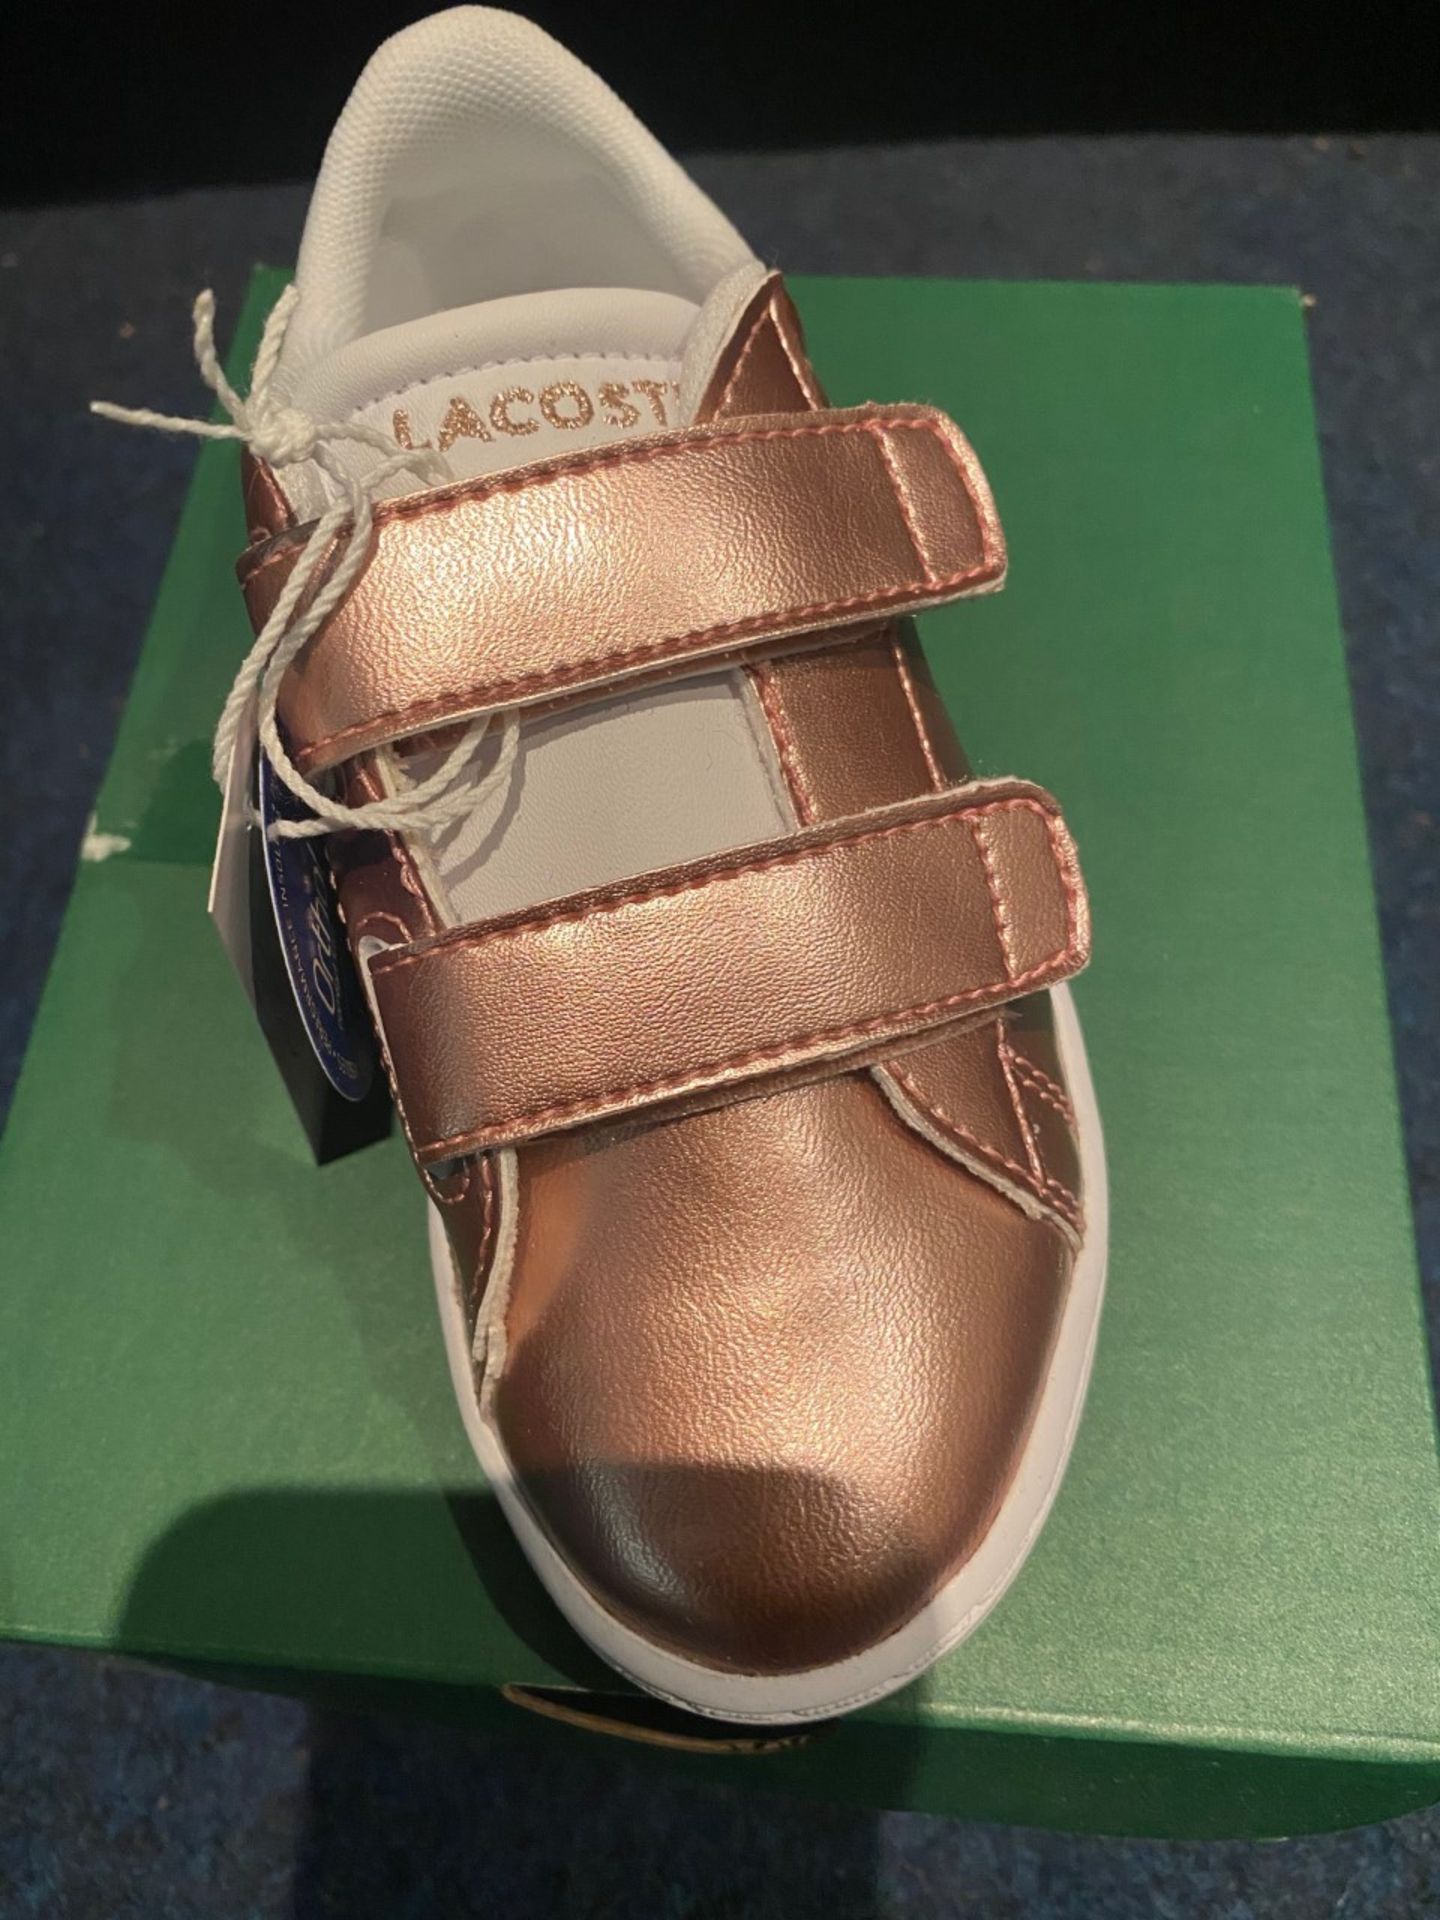 NEW & BOXED LACOSTE ROSE GOLD TRAINERS SIZE INFANT 9 - Image 3 of 3